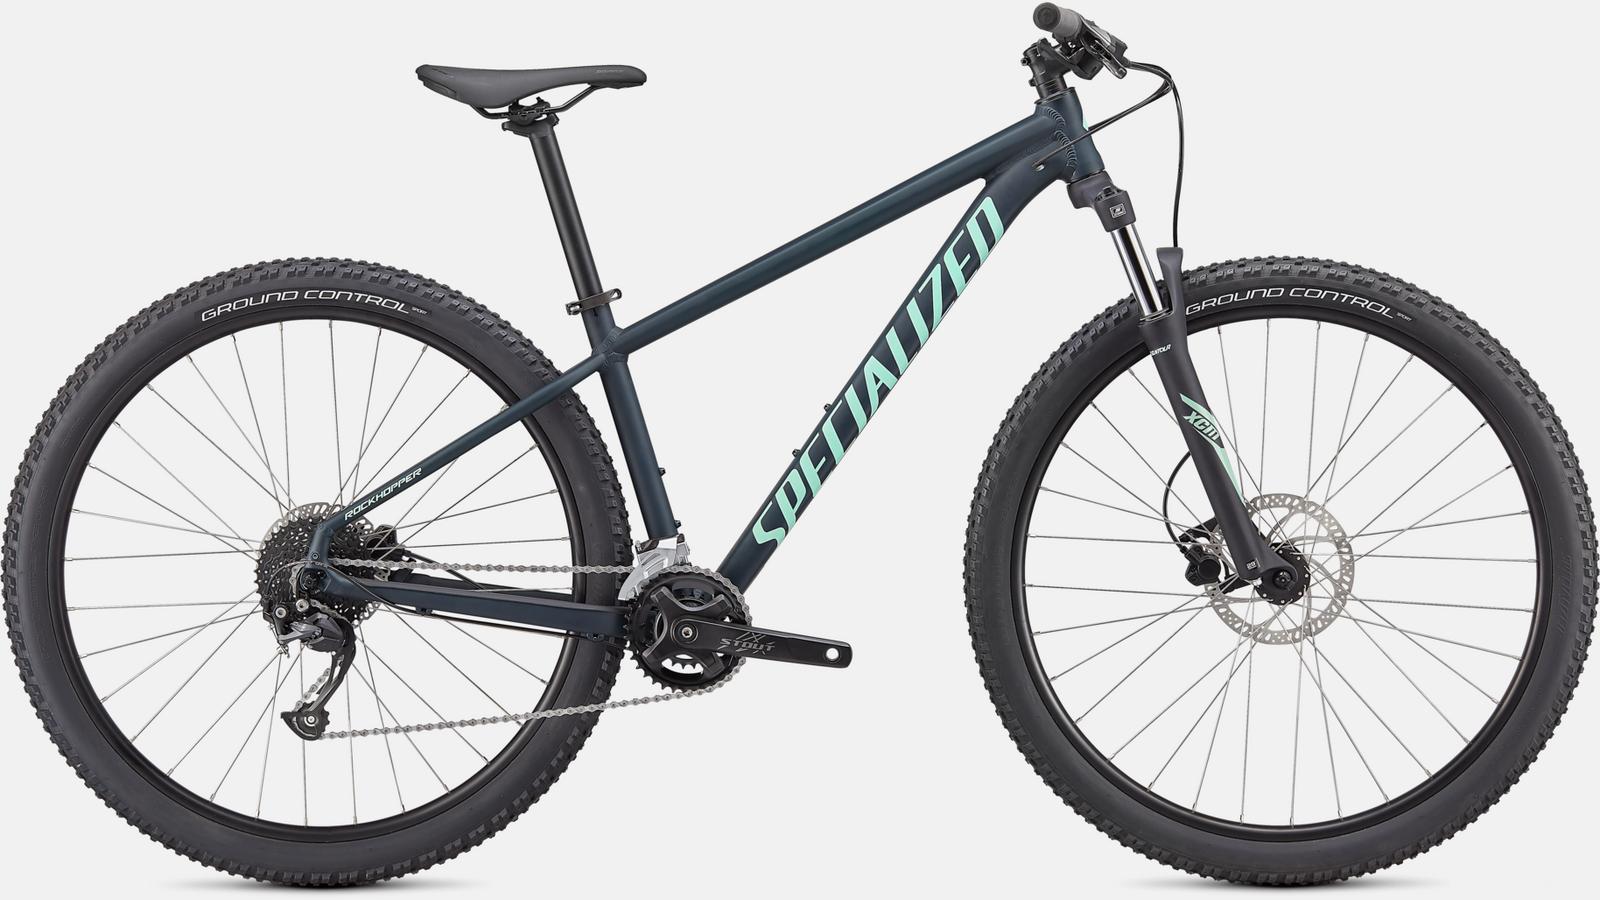 Paint for 2021 Specialized Rockhopper Sport 27.5 - Satin Forest Green